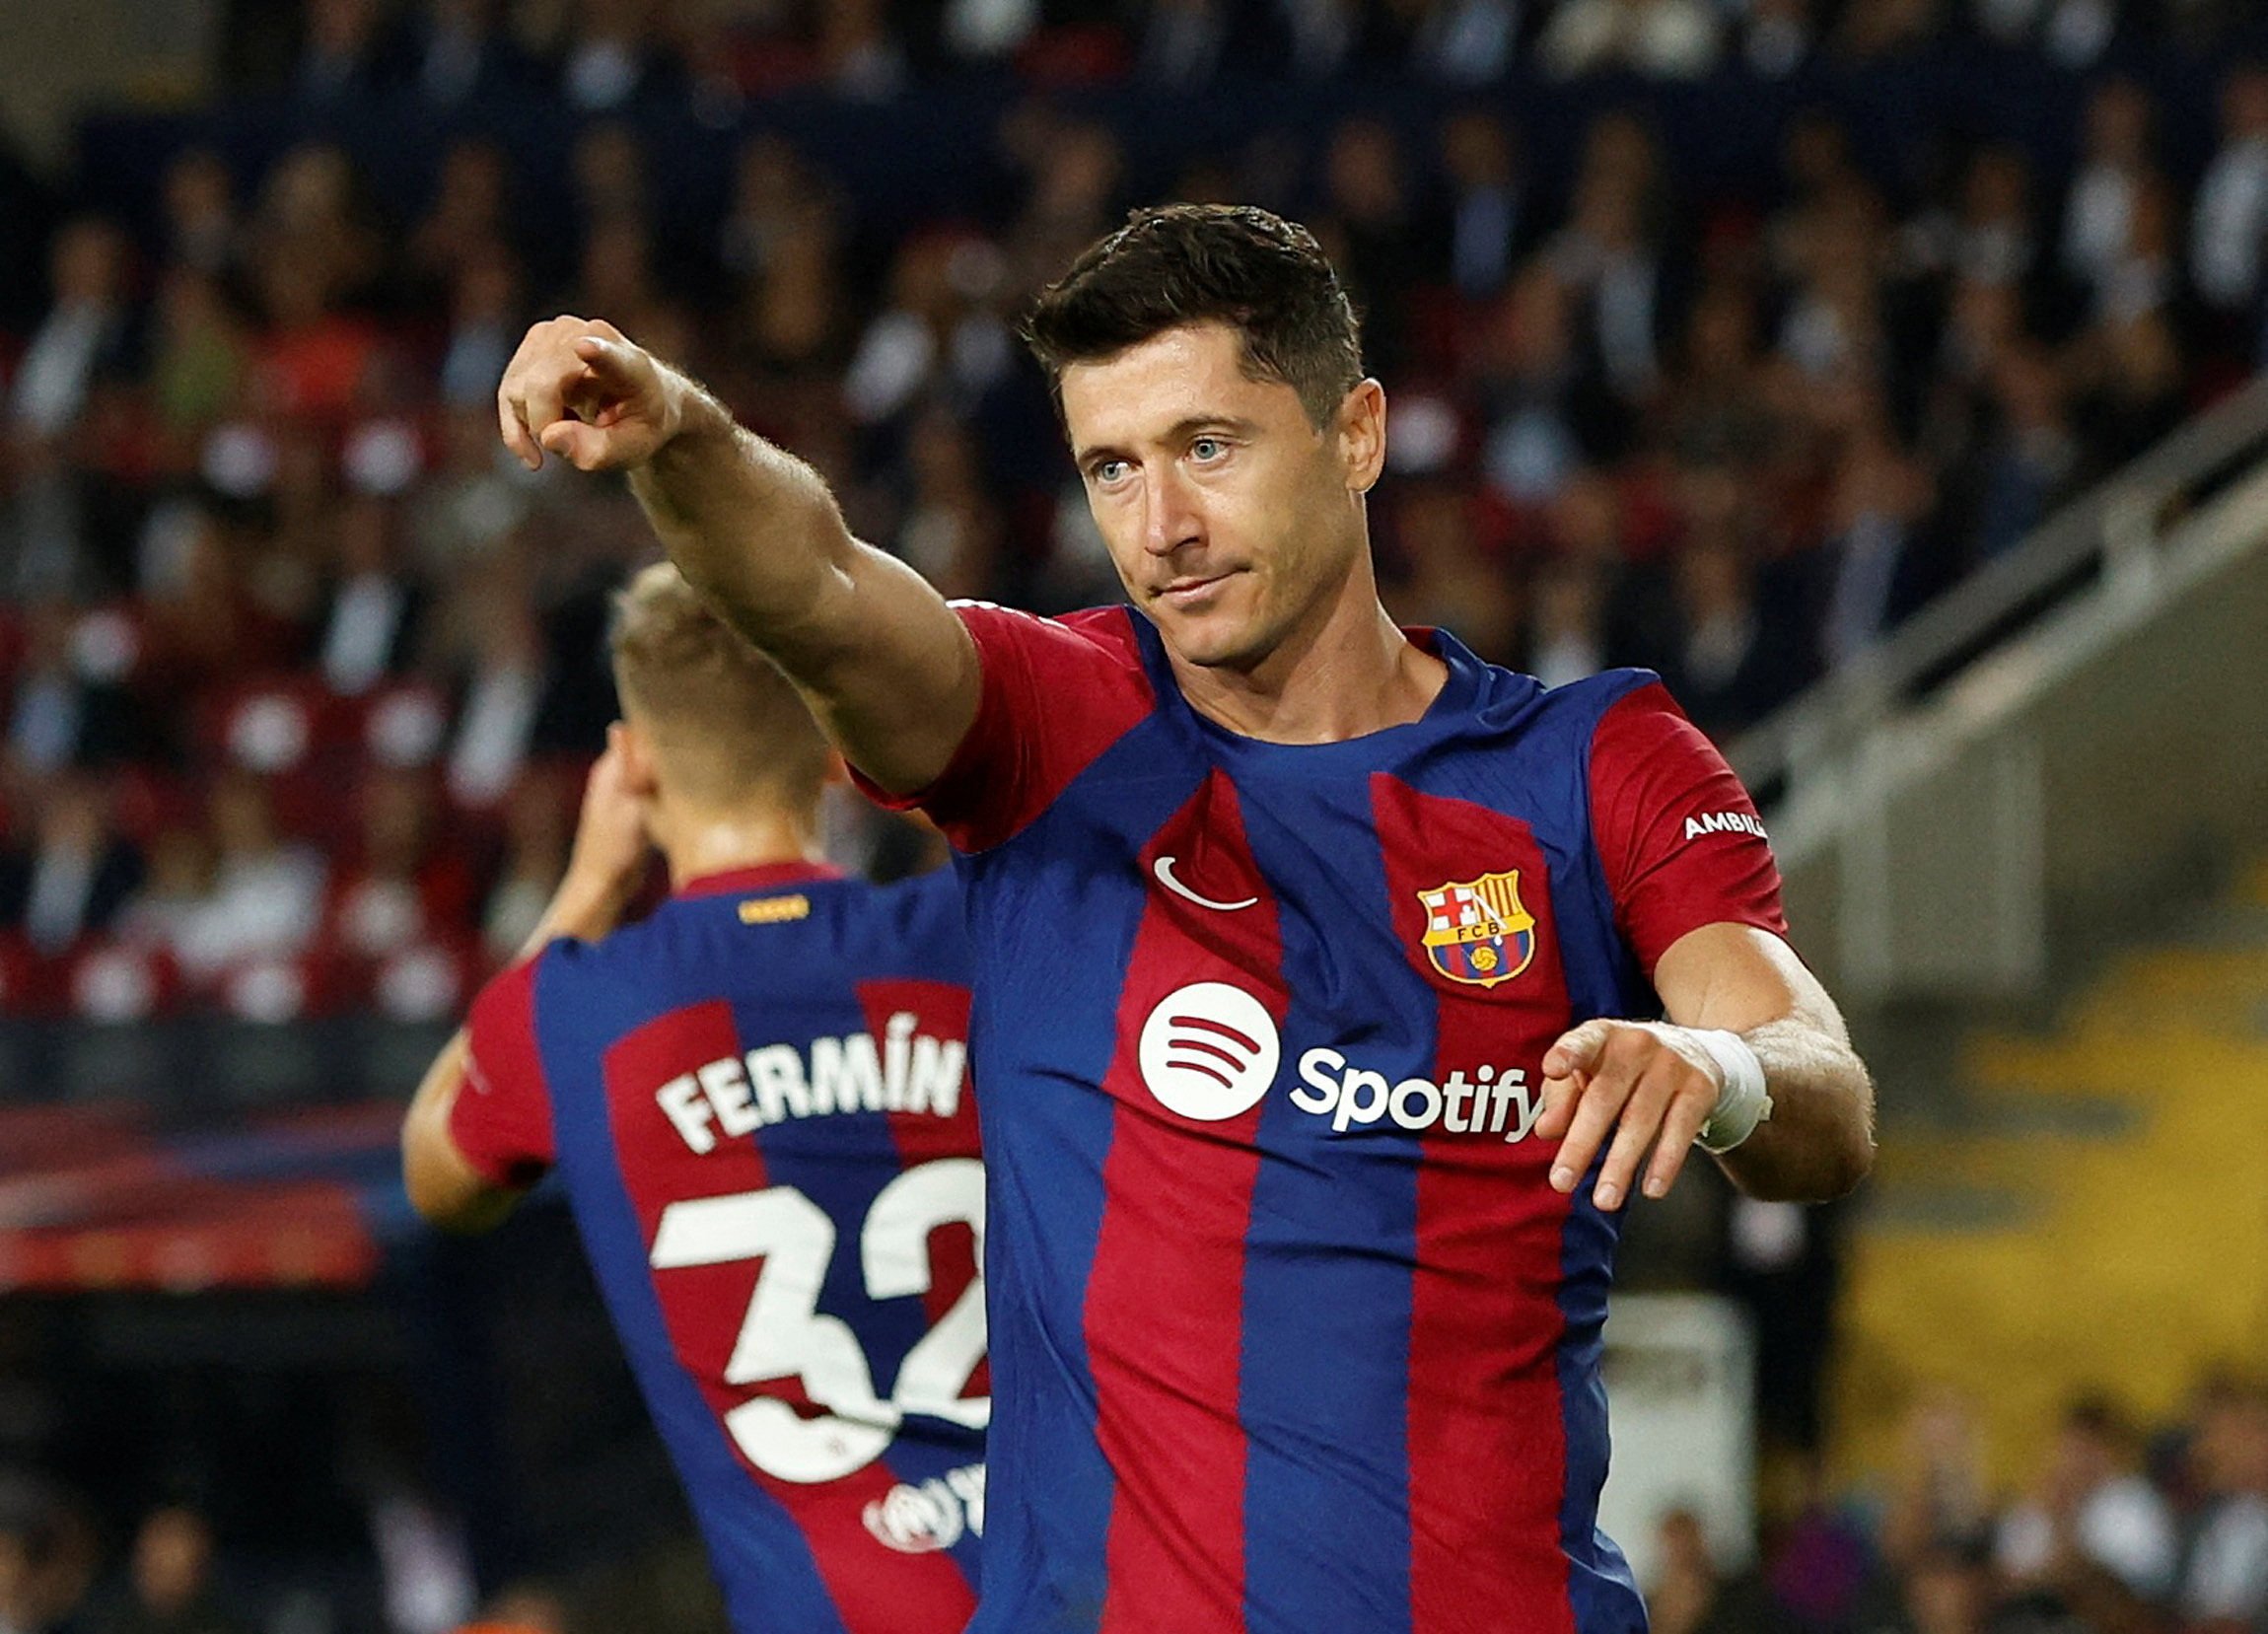 Real Madrid will have their hands full trying to tame star Barcelona forward Robert Lewandowski in Saturday’s Clasico encounter. Photo: REUTERS